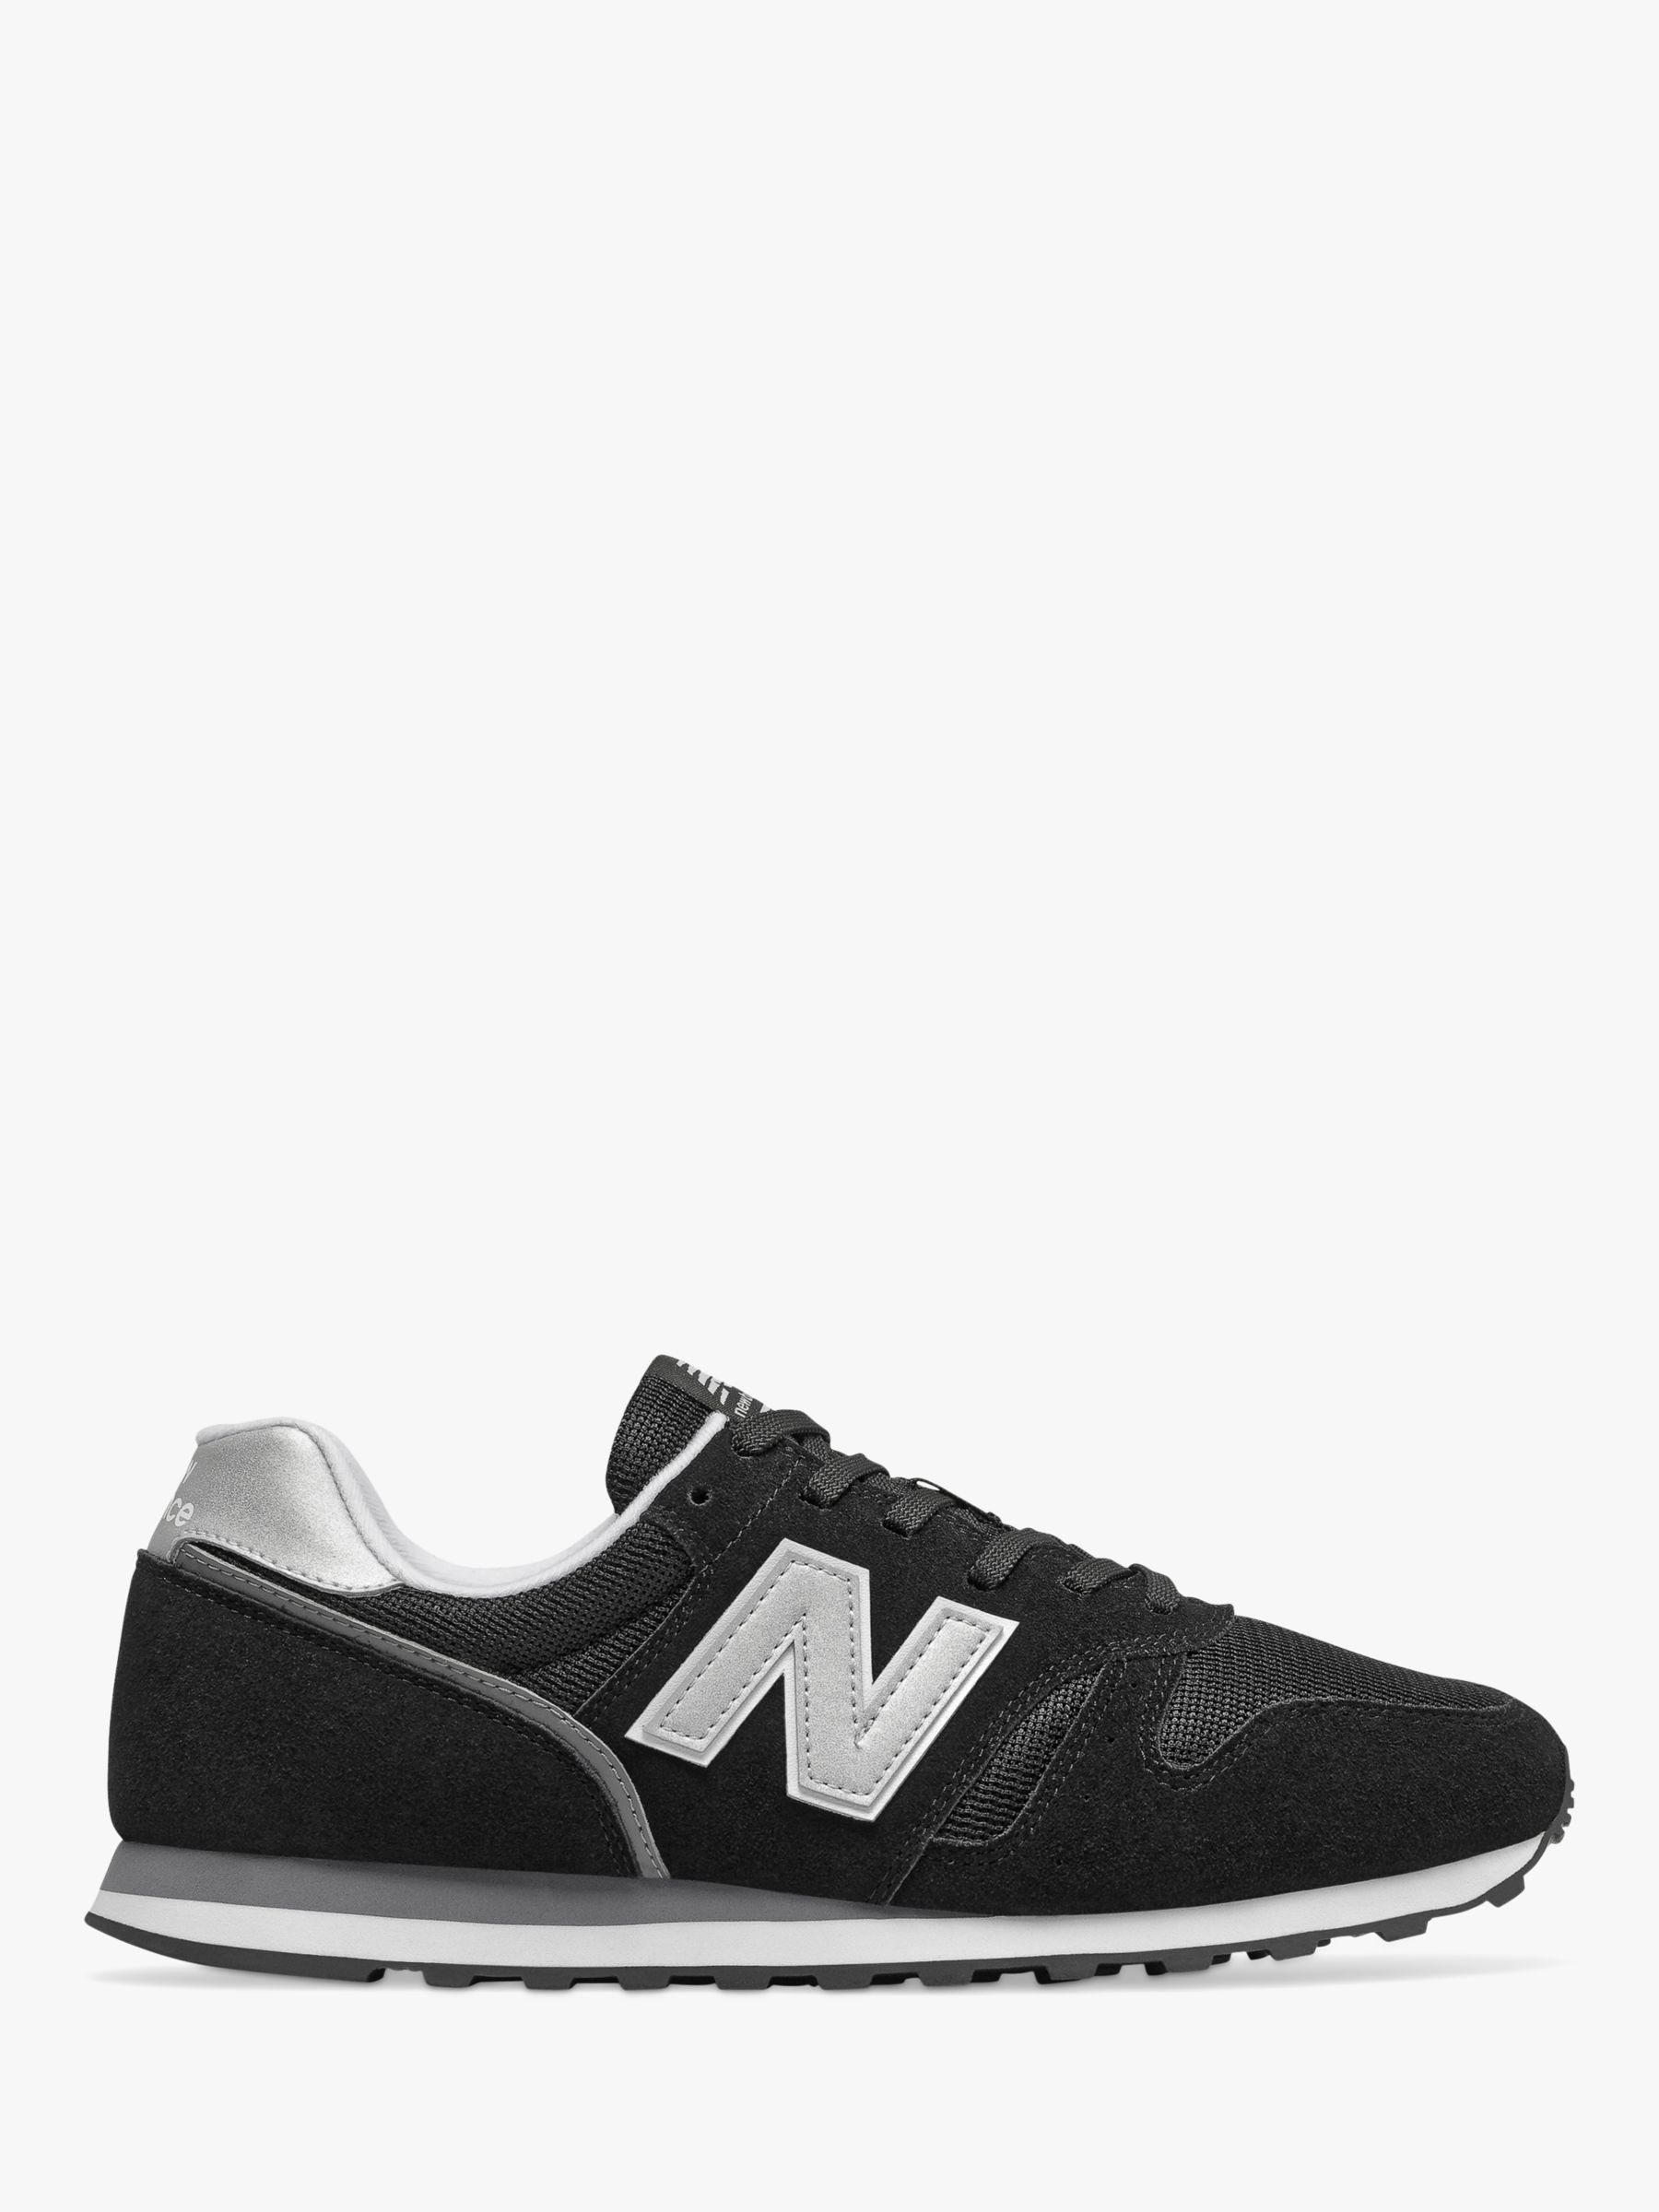 new balance 373 trainers black silver